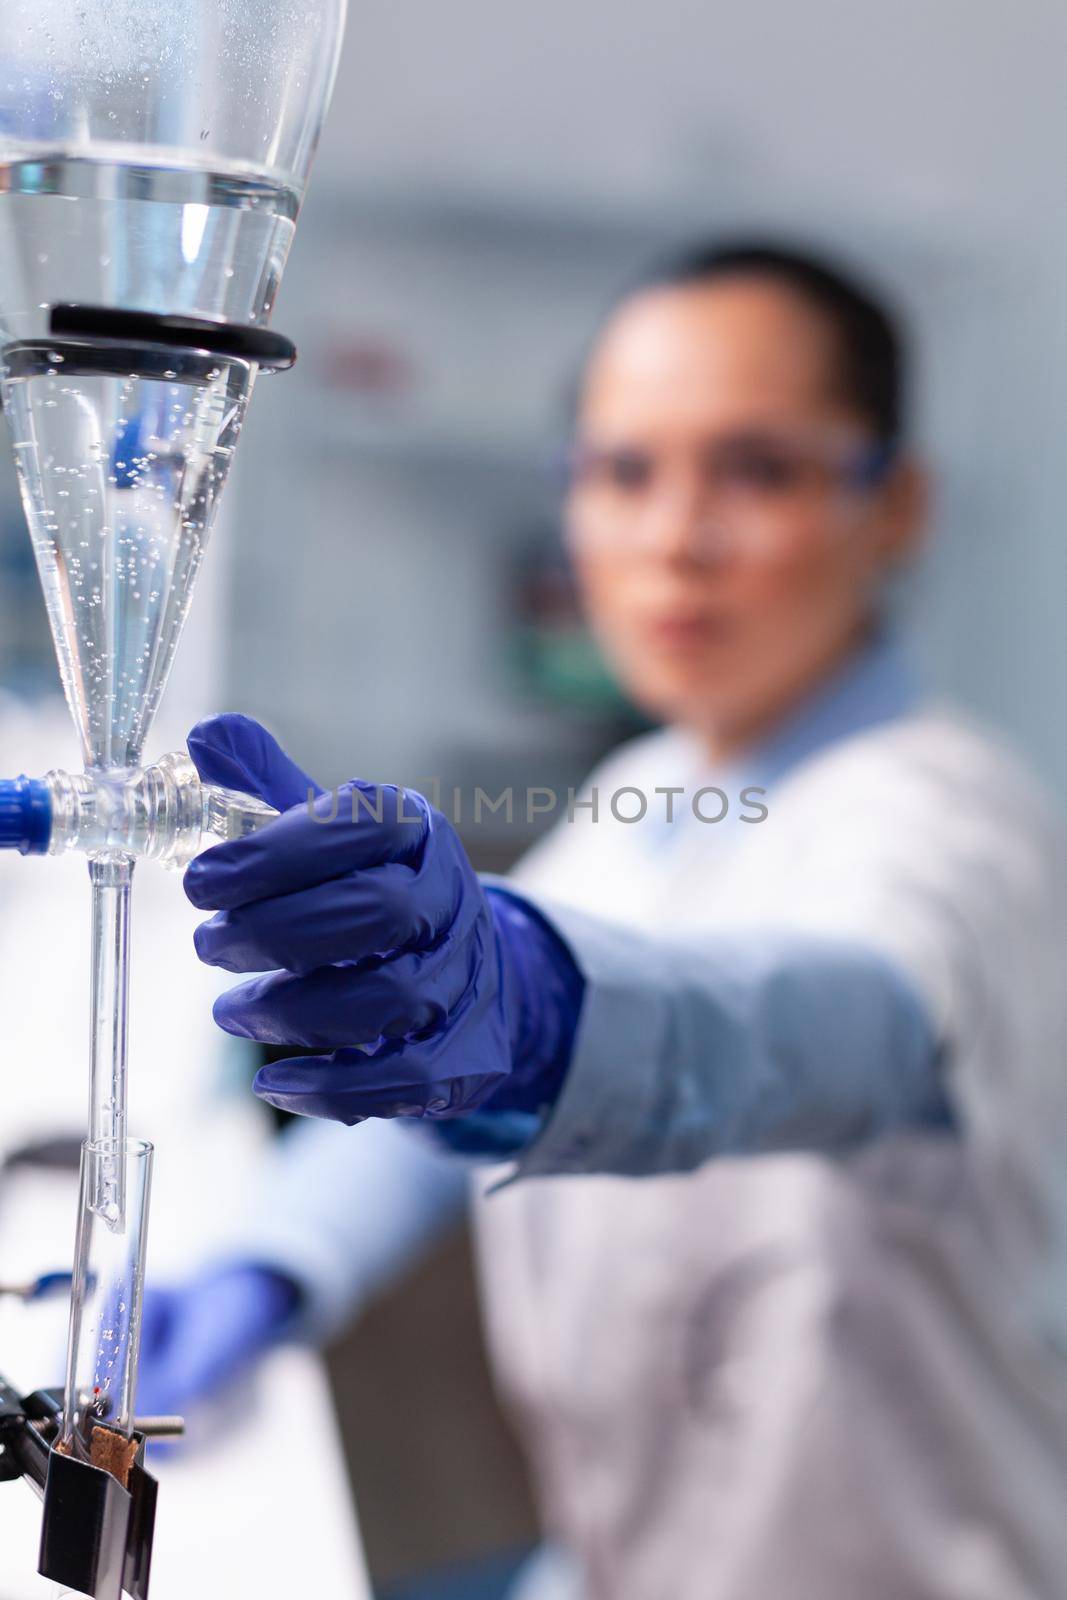 Specialist chemist woman working at biochemistry experiment using professional biology tools by DCStudio